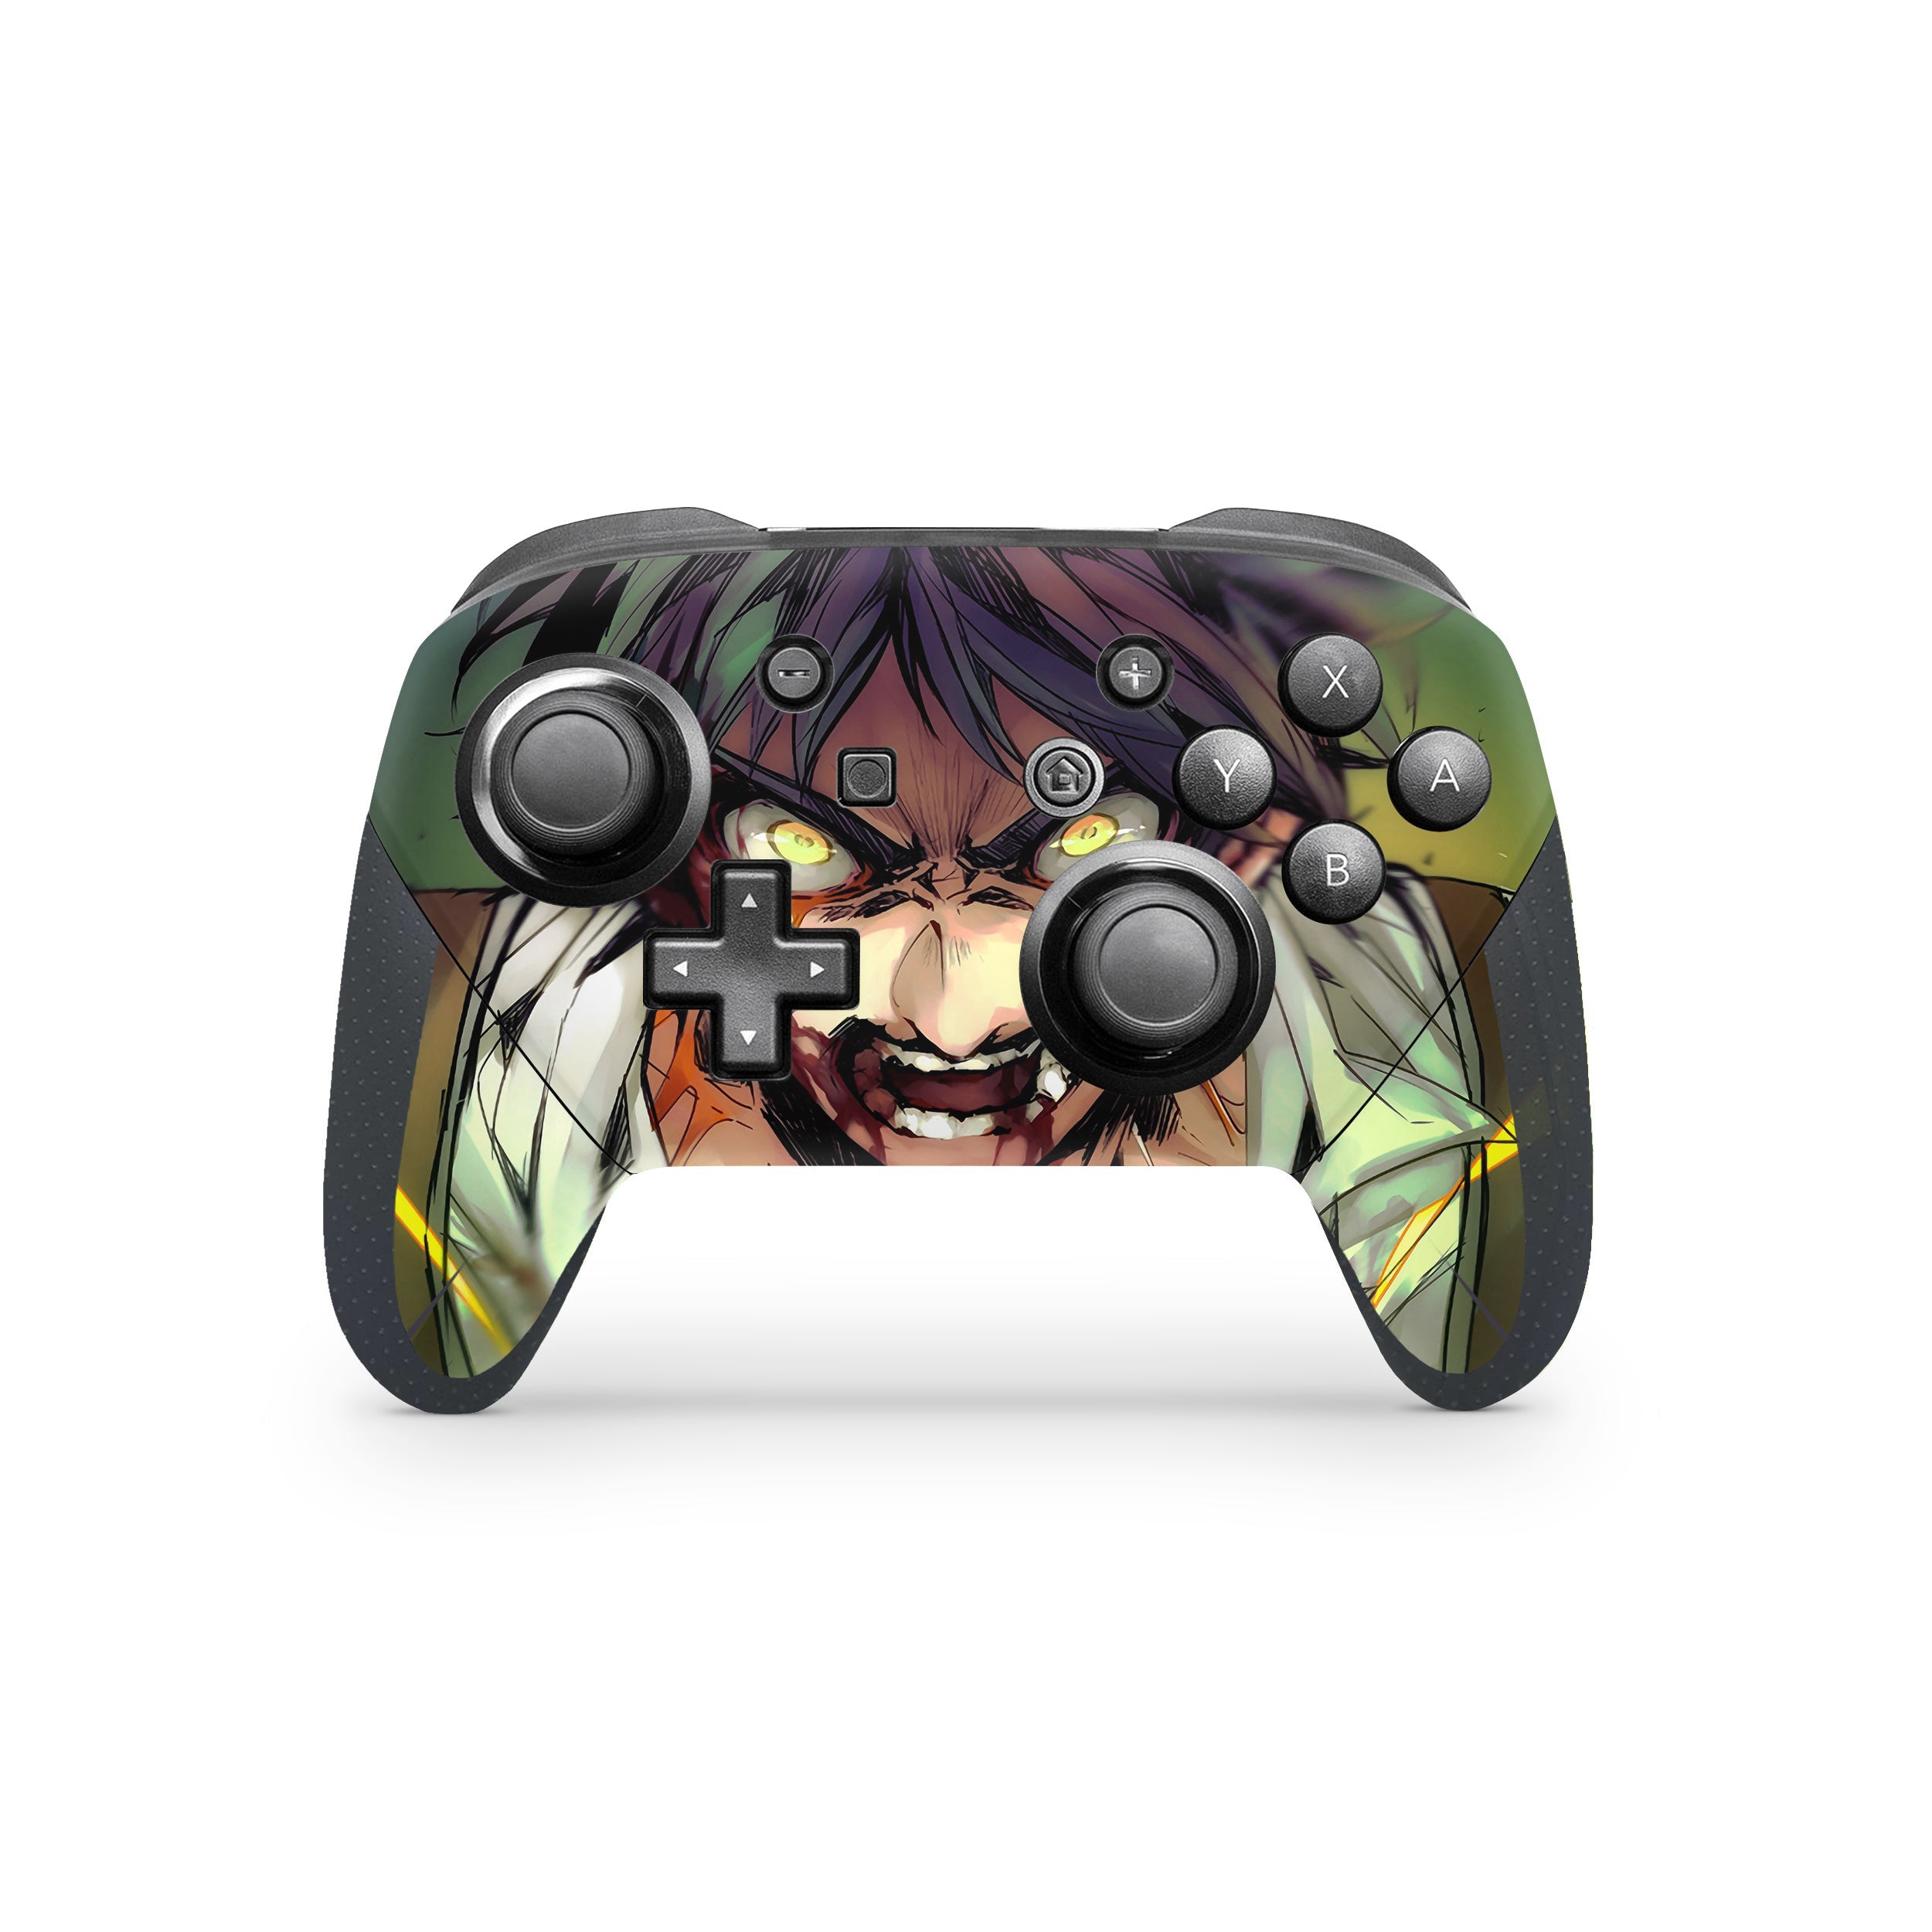 A video game skin featuring a Attack On Titan Eren Yeager design for the Switch Pro Controller.